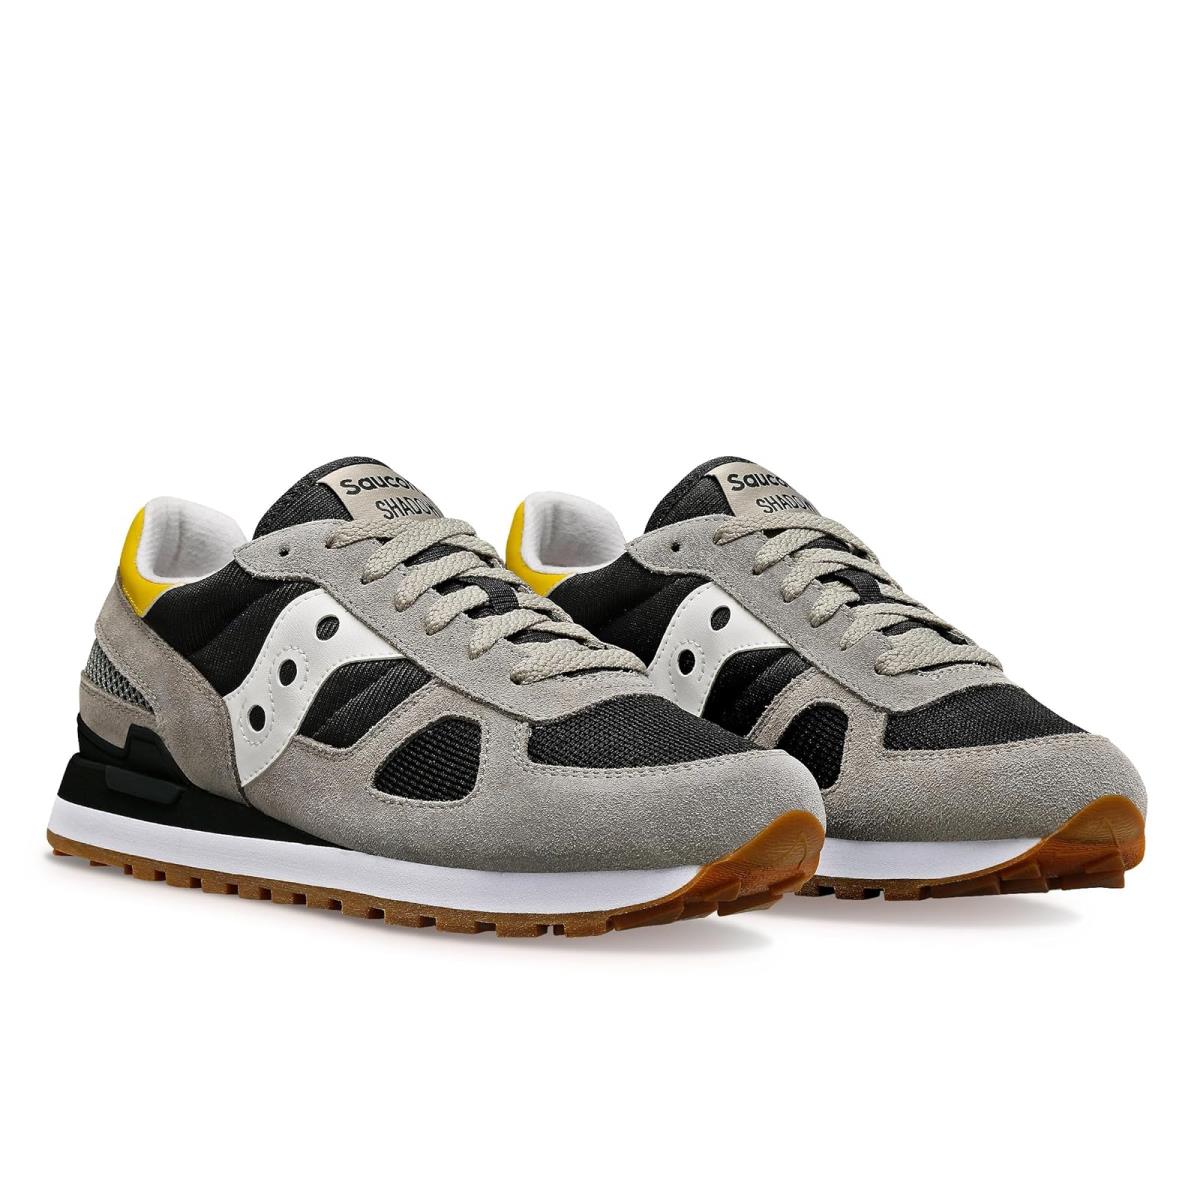 Unisex Sneakers Athletic Shoes Saucony s Shadow Black/Grey